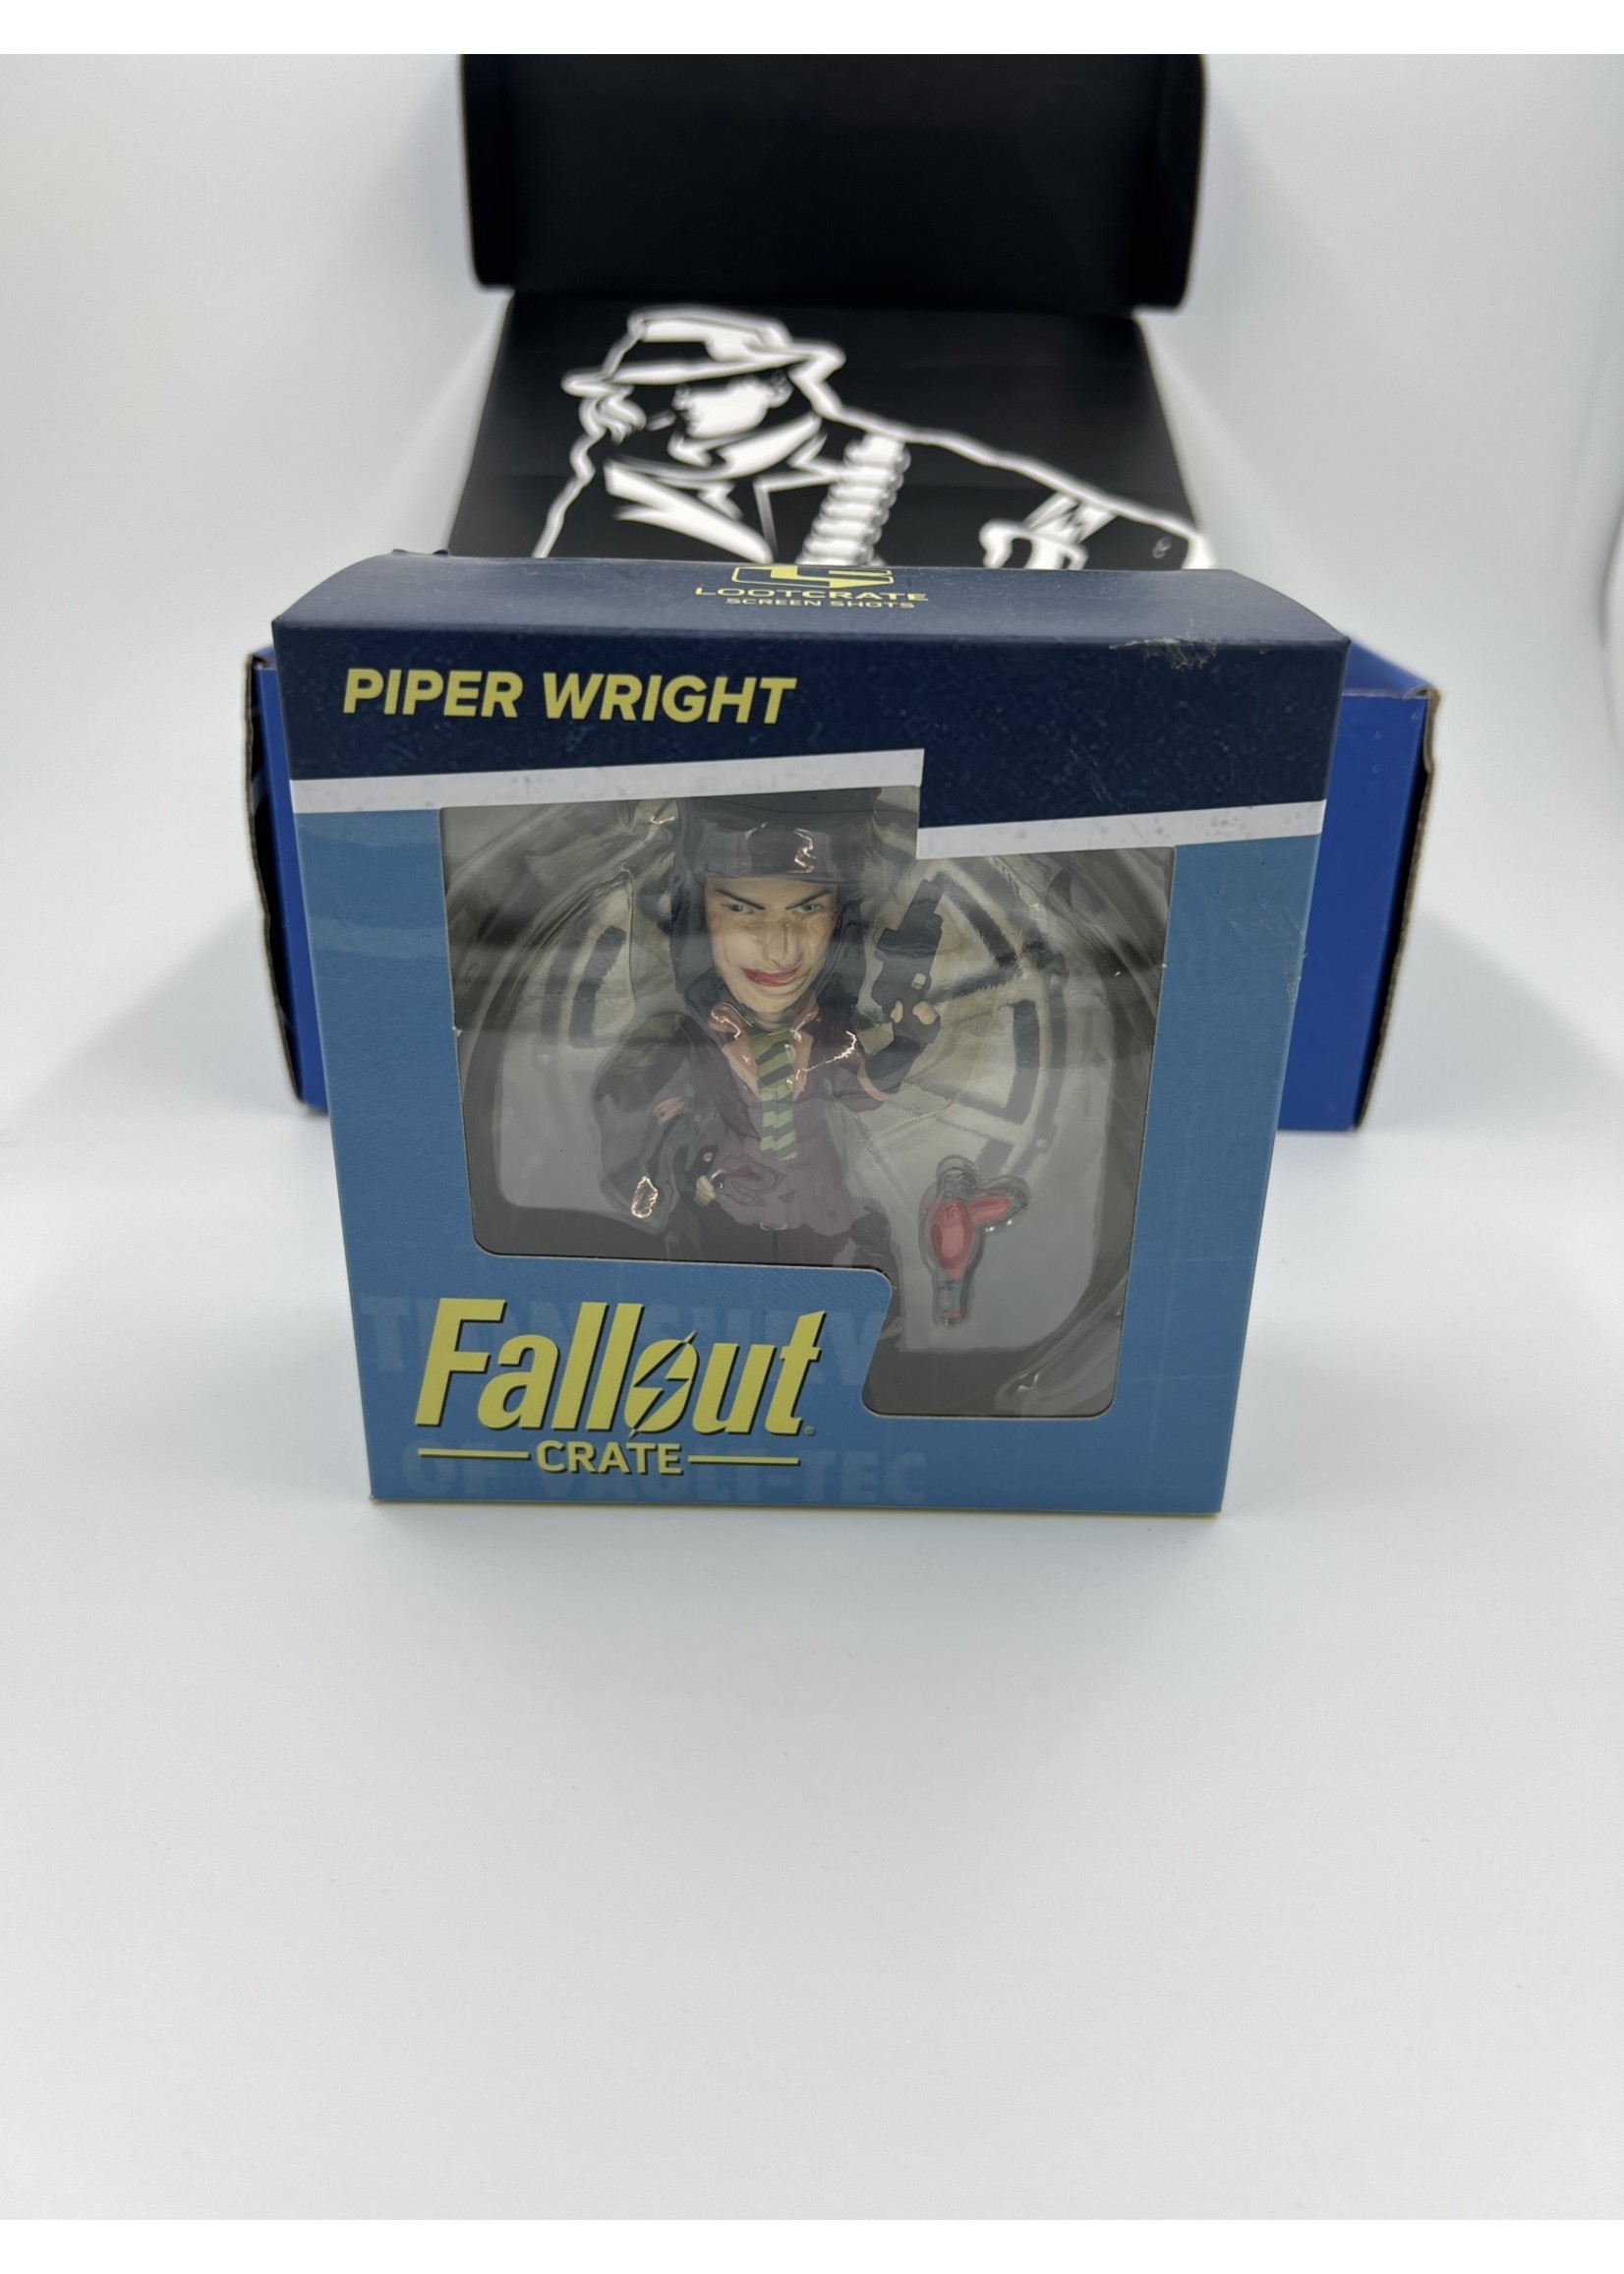 Action Figures Piper Wright Lootcrate Screen Shots Fallout Crate Figure With Box